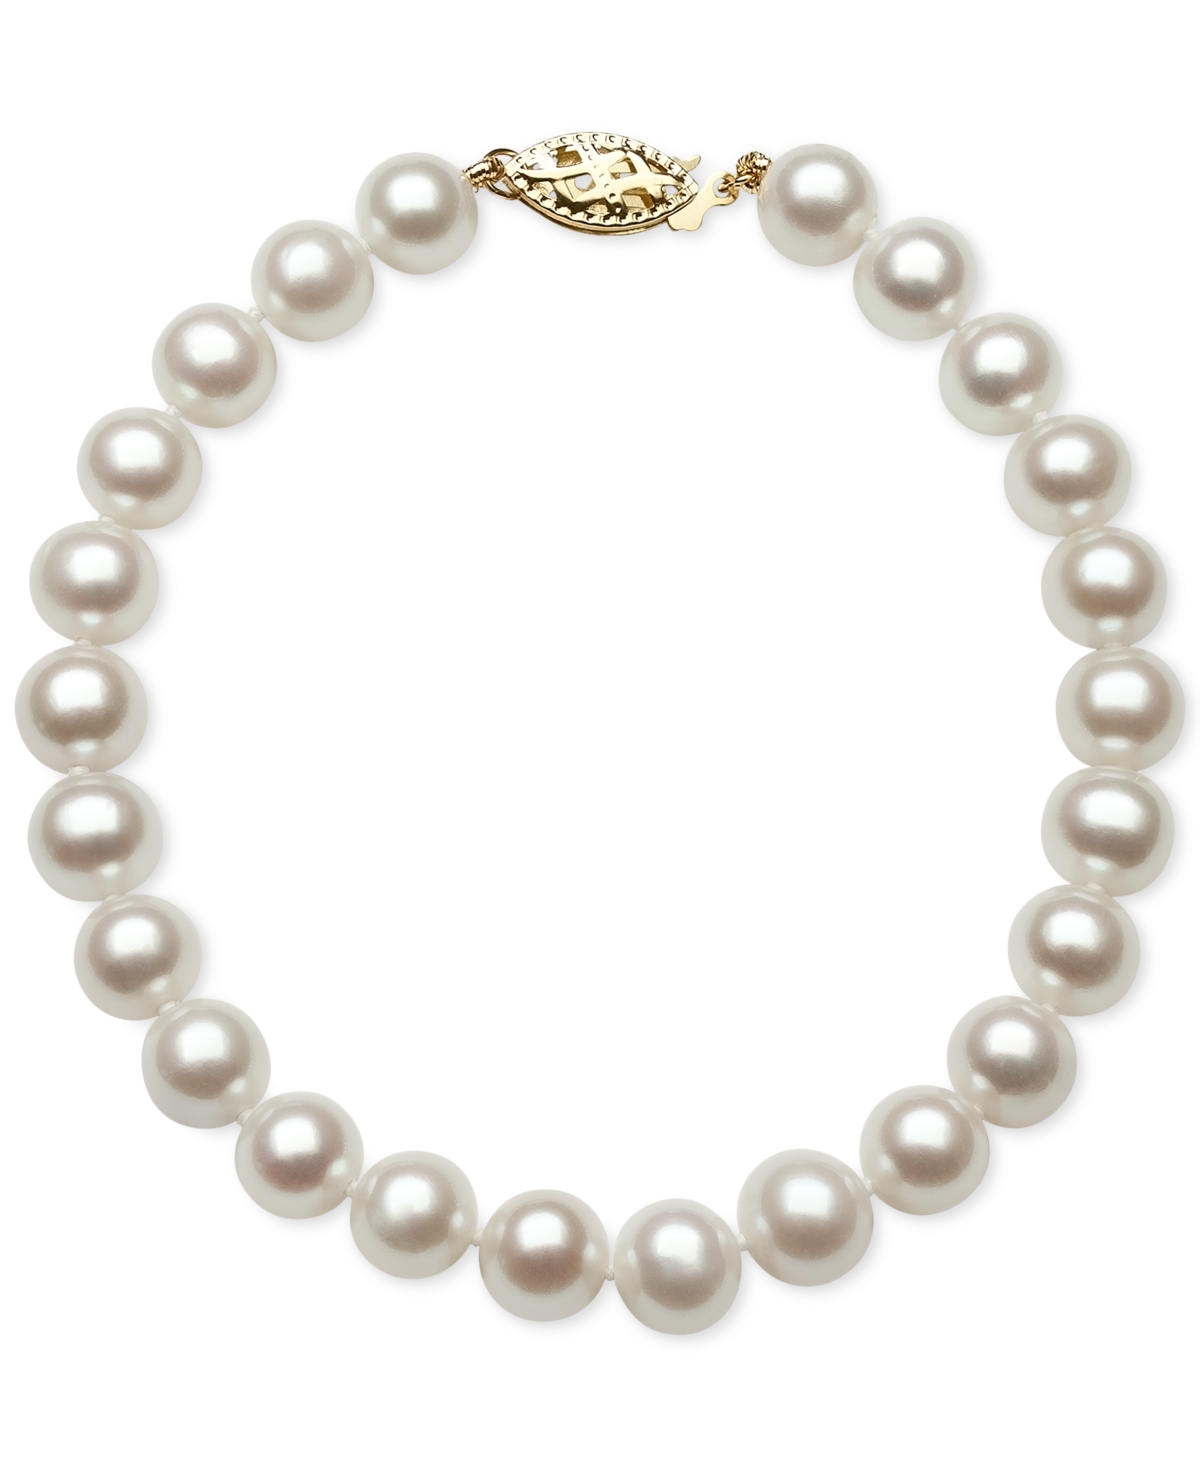 Cultured Freshwater Pearl Bracelet (7mm) in 14k Gold - Yellow Gold